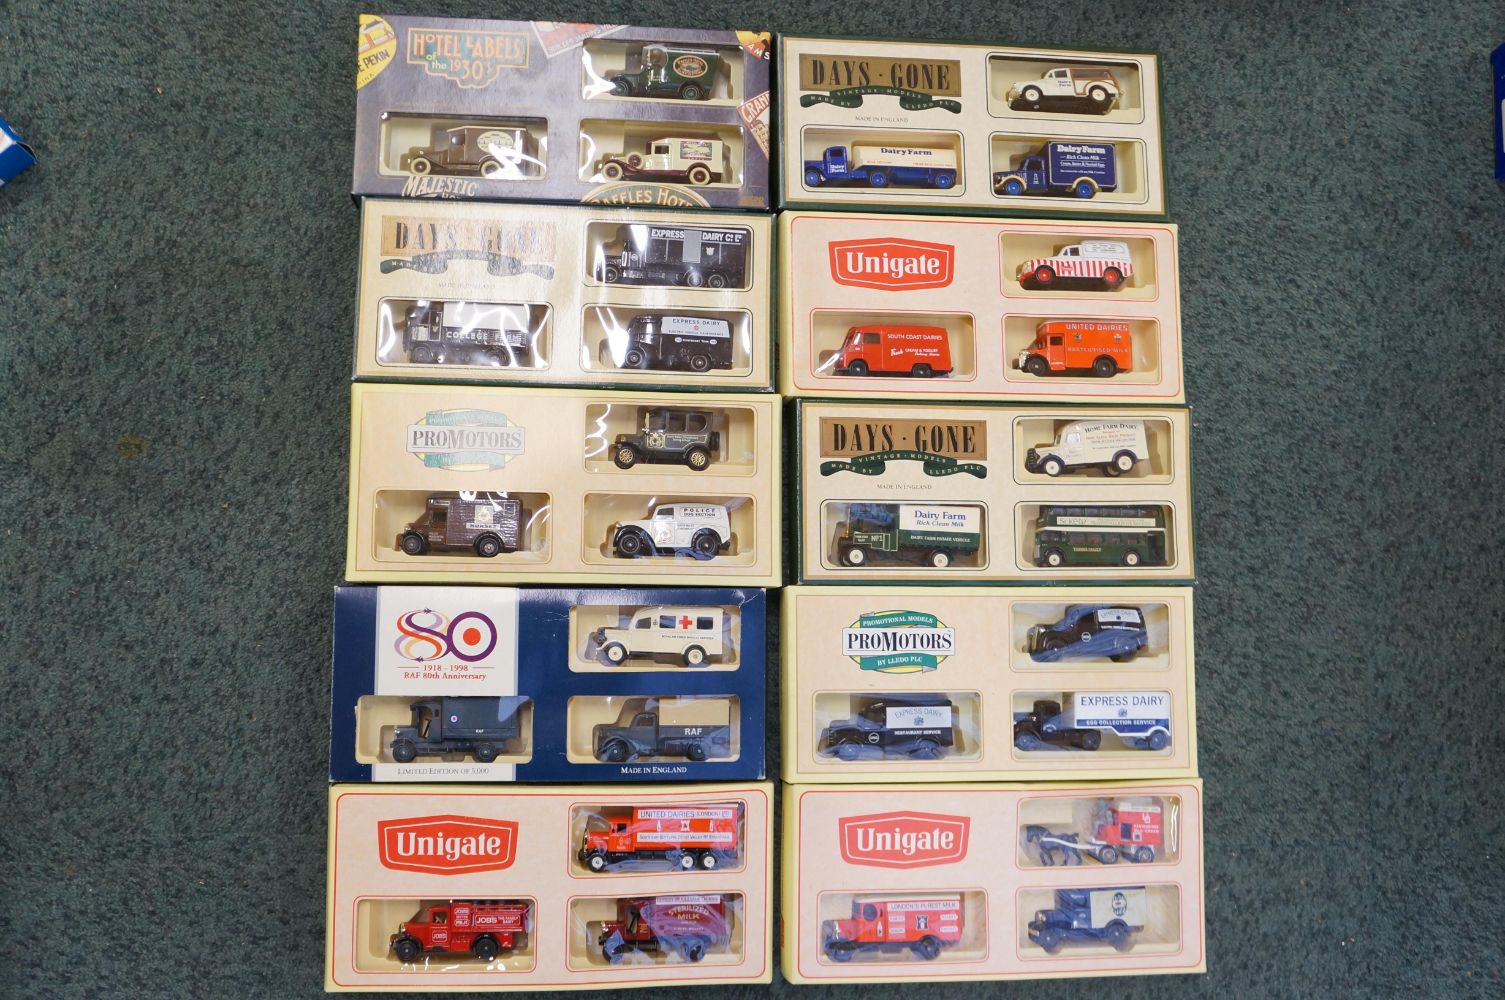 Timed Auction - Corgi, Dinky, Matchbox and other model vehicle toy auction